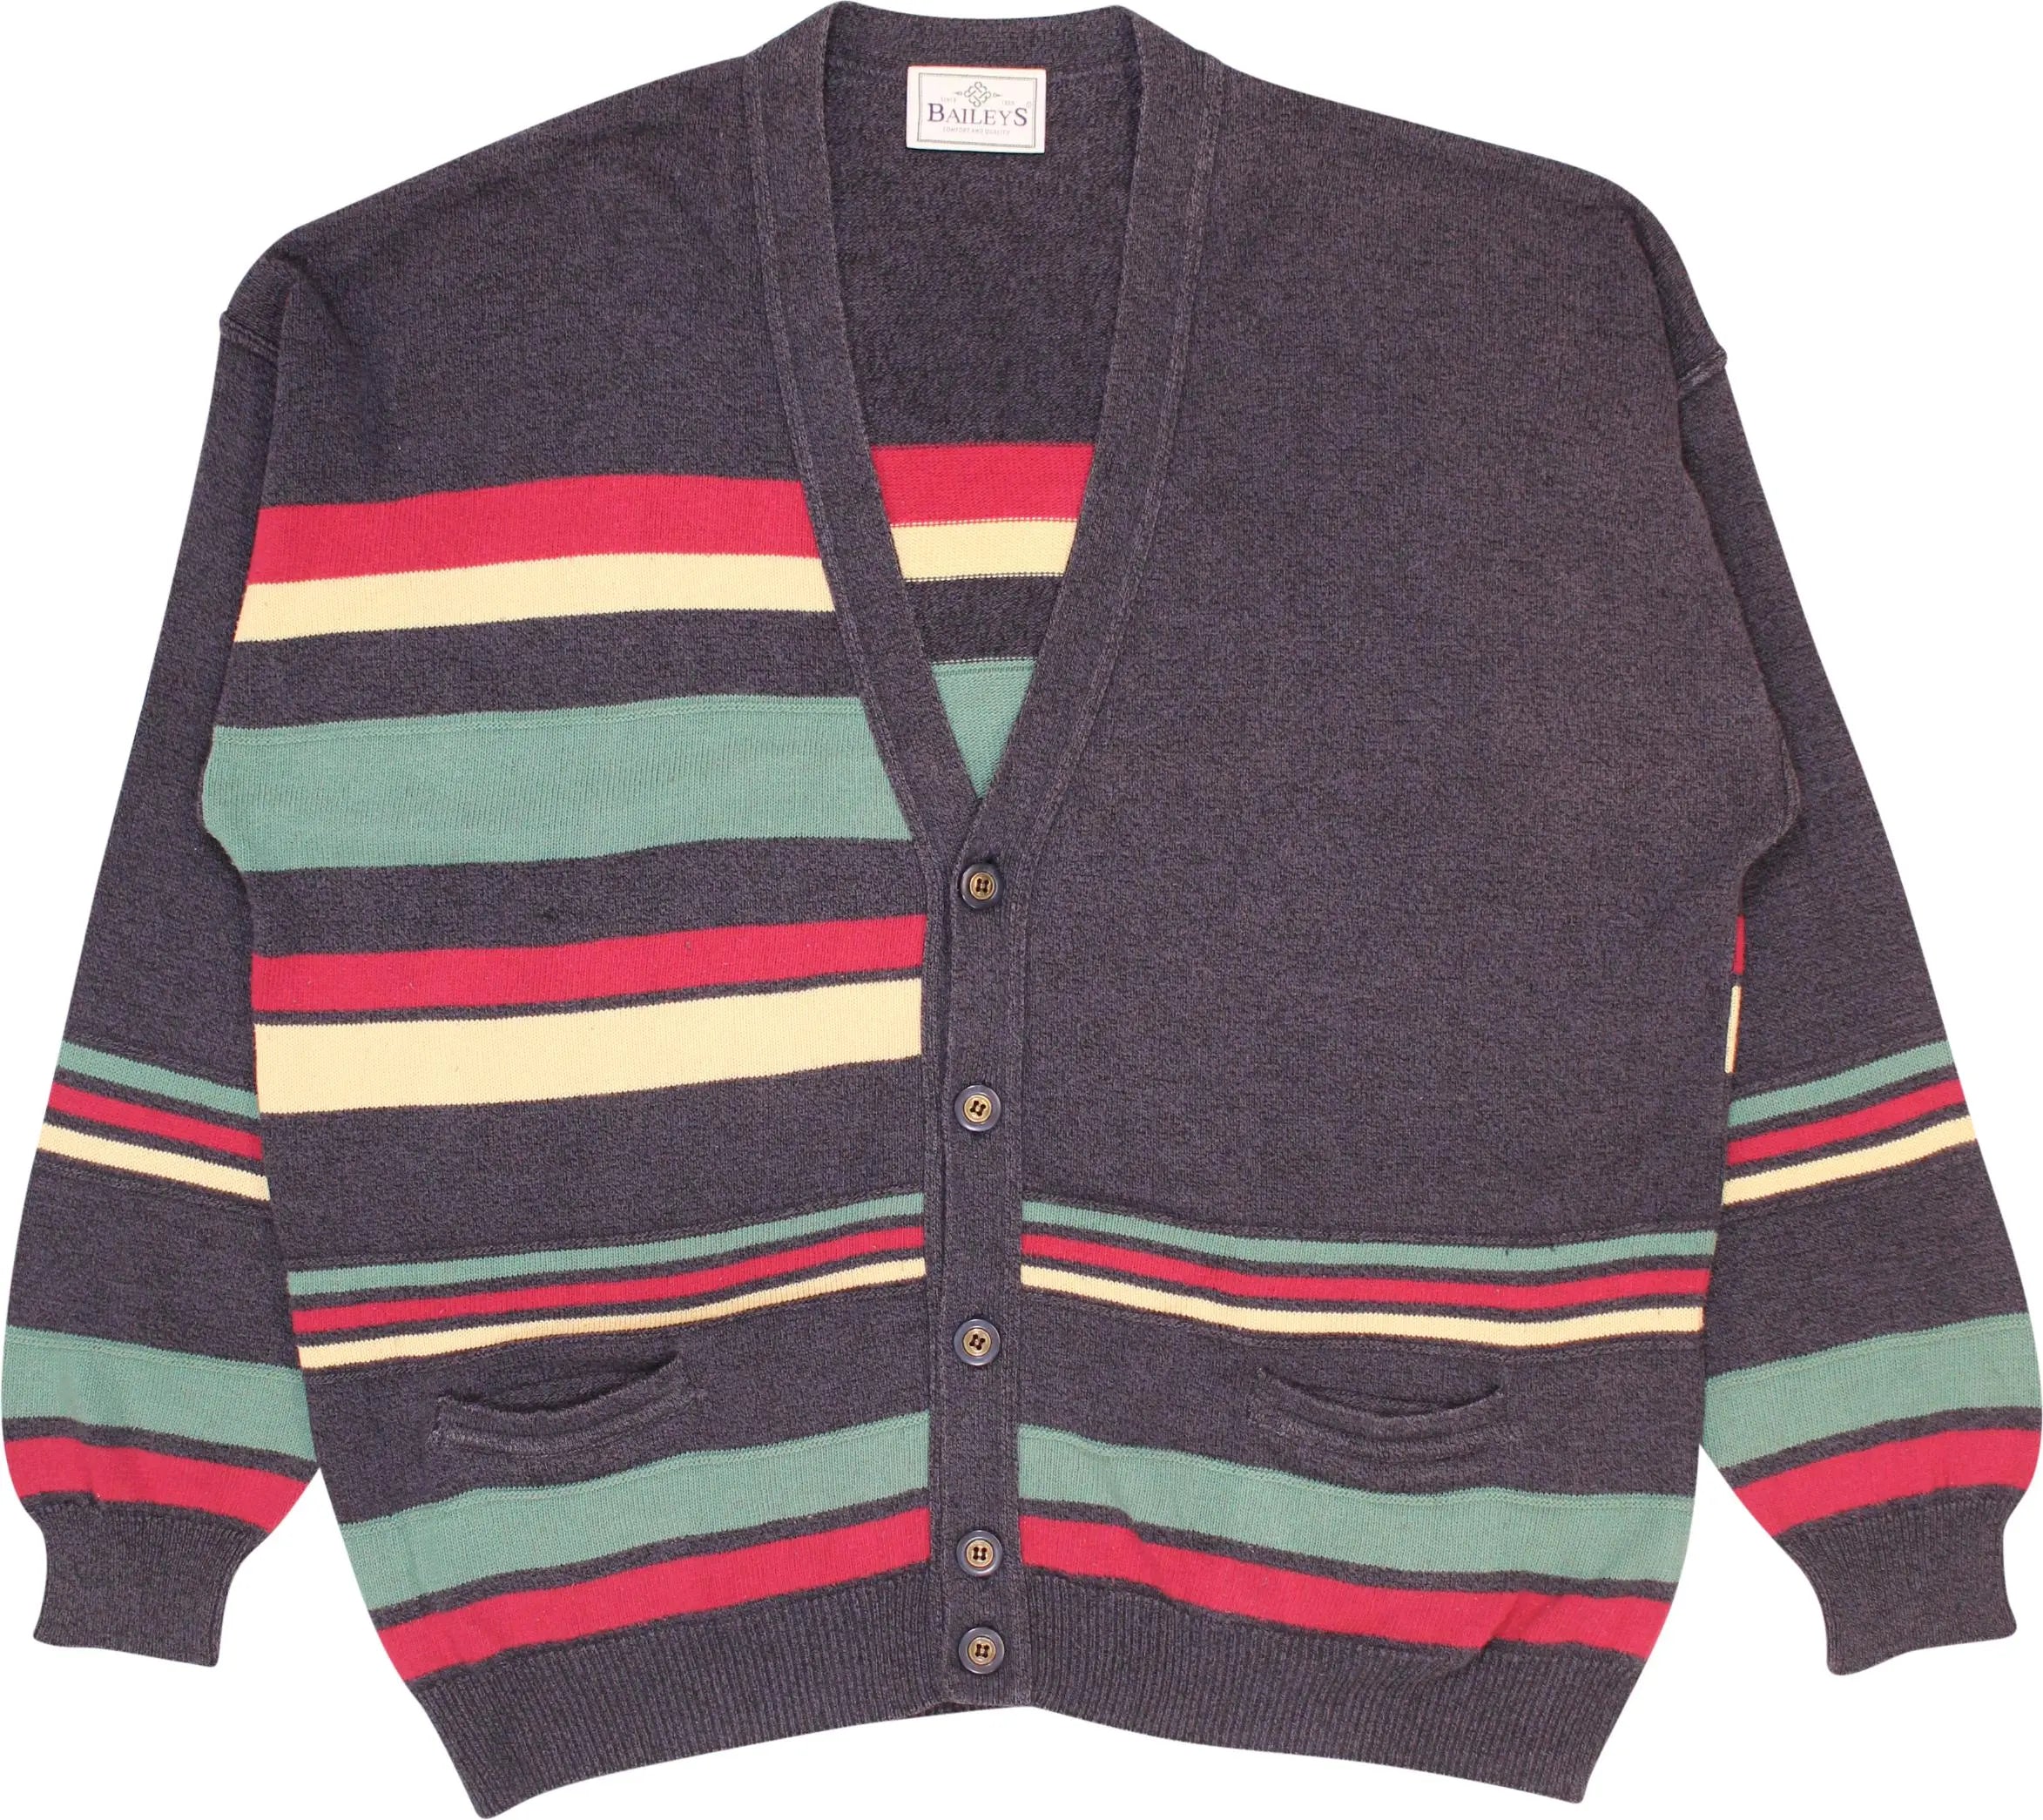 Baileys - Buttoned Cardigan- ThriftTale.com - Vintage and second handclothing